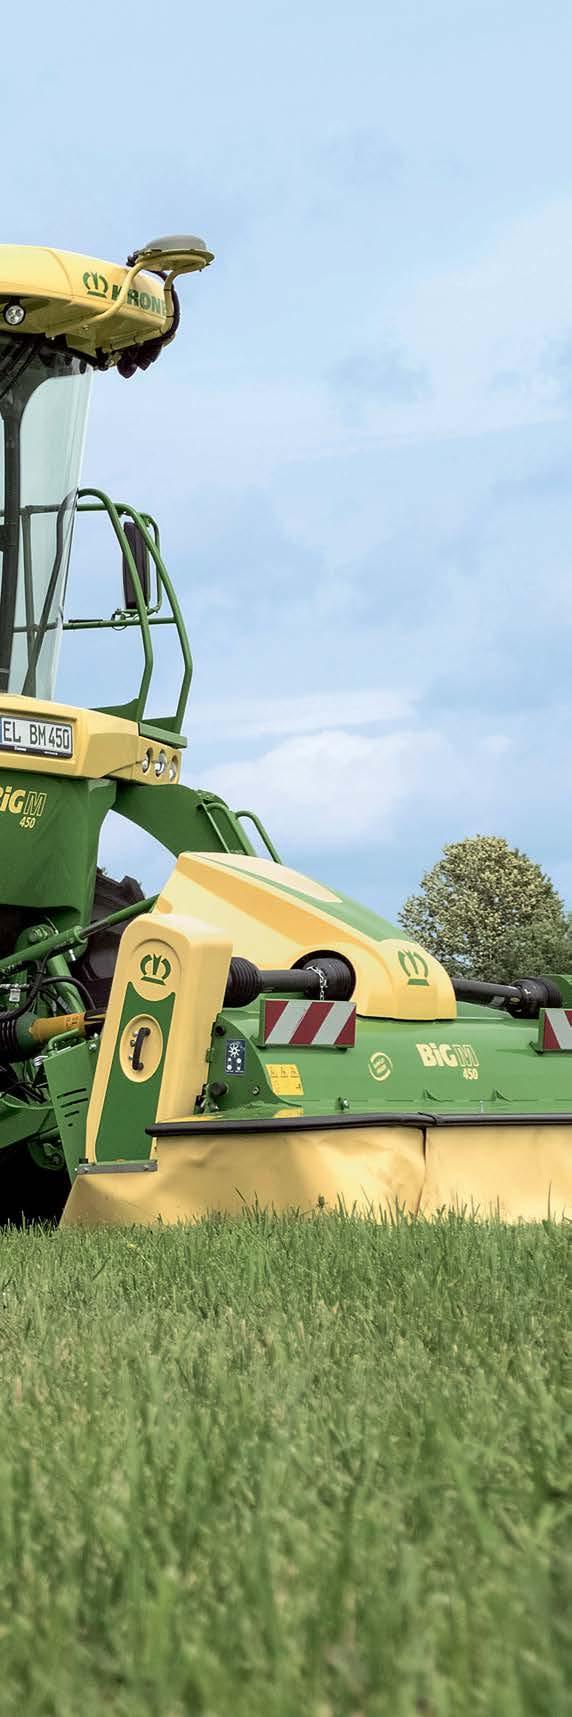 With the BiG M 450, KRONE presents another upgrade of its self-propelled mower.